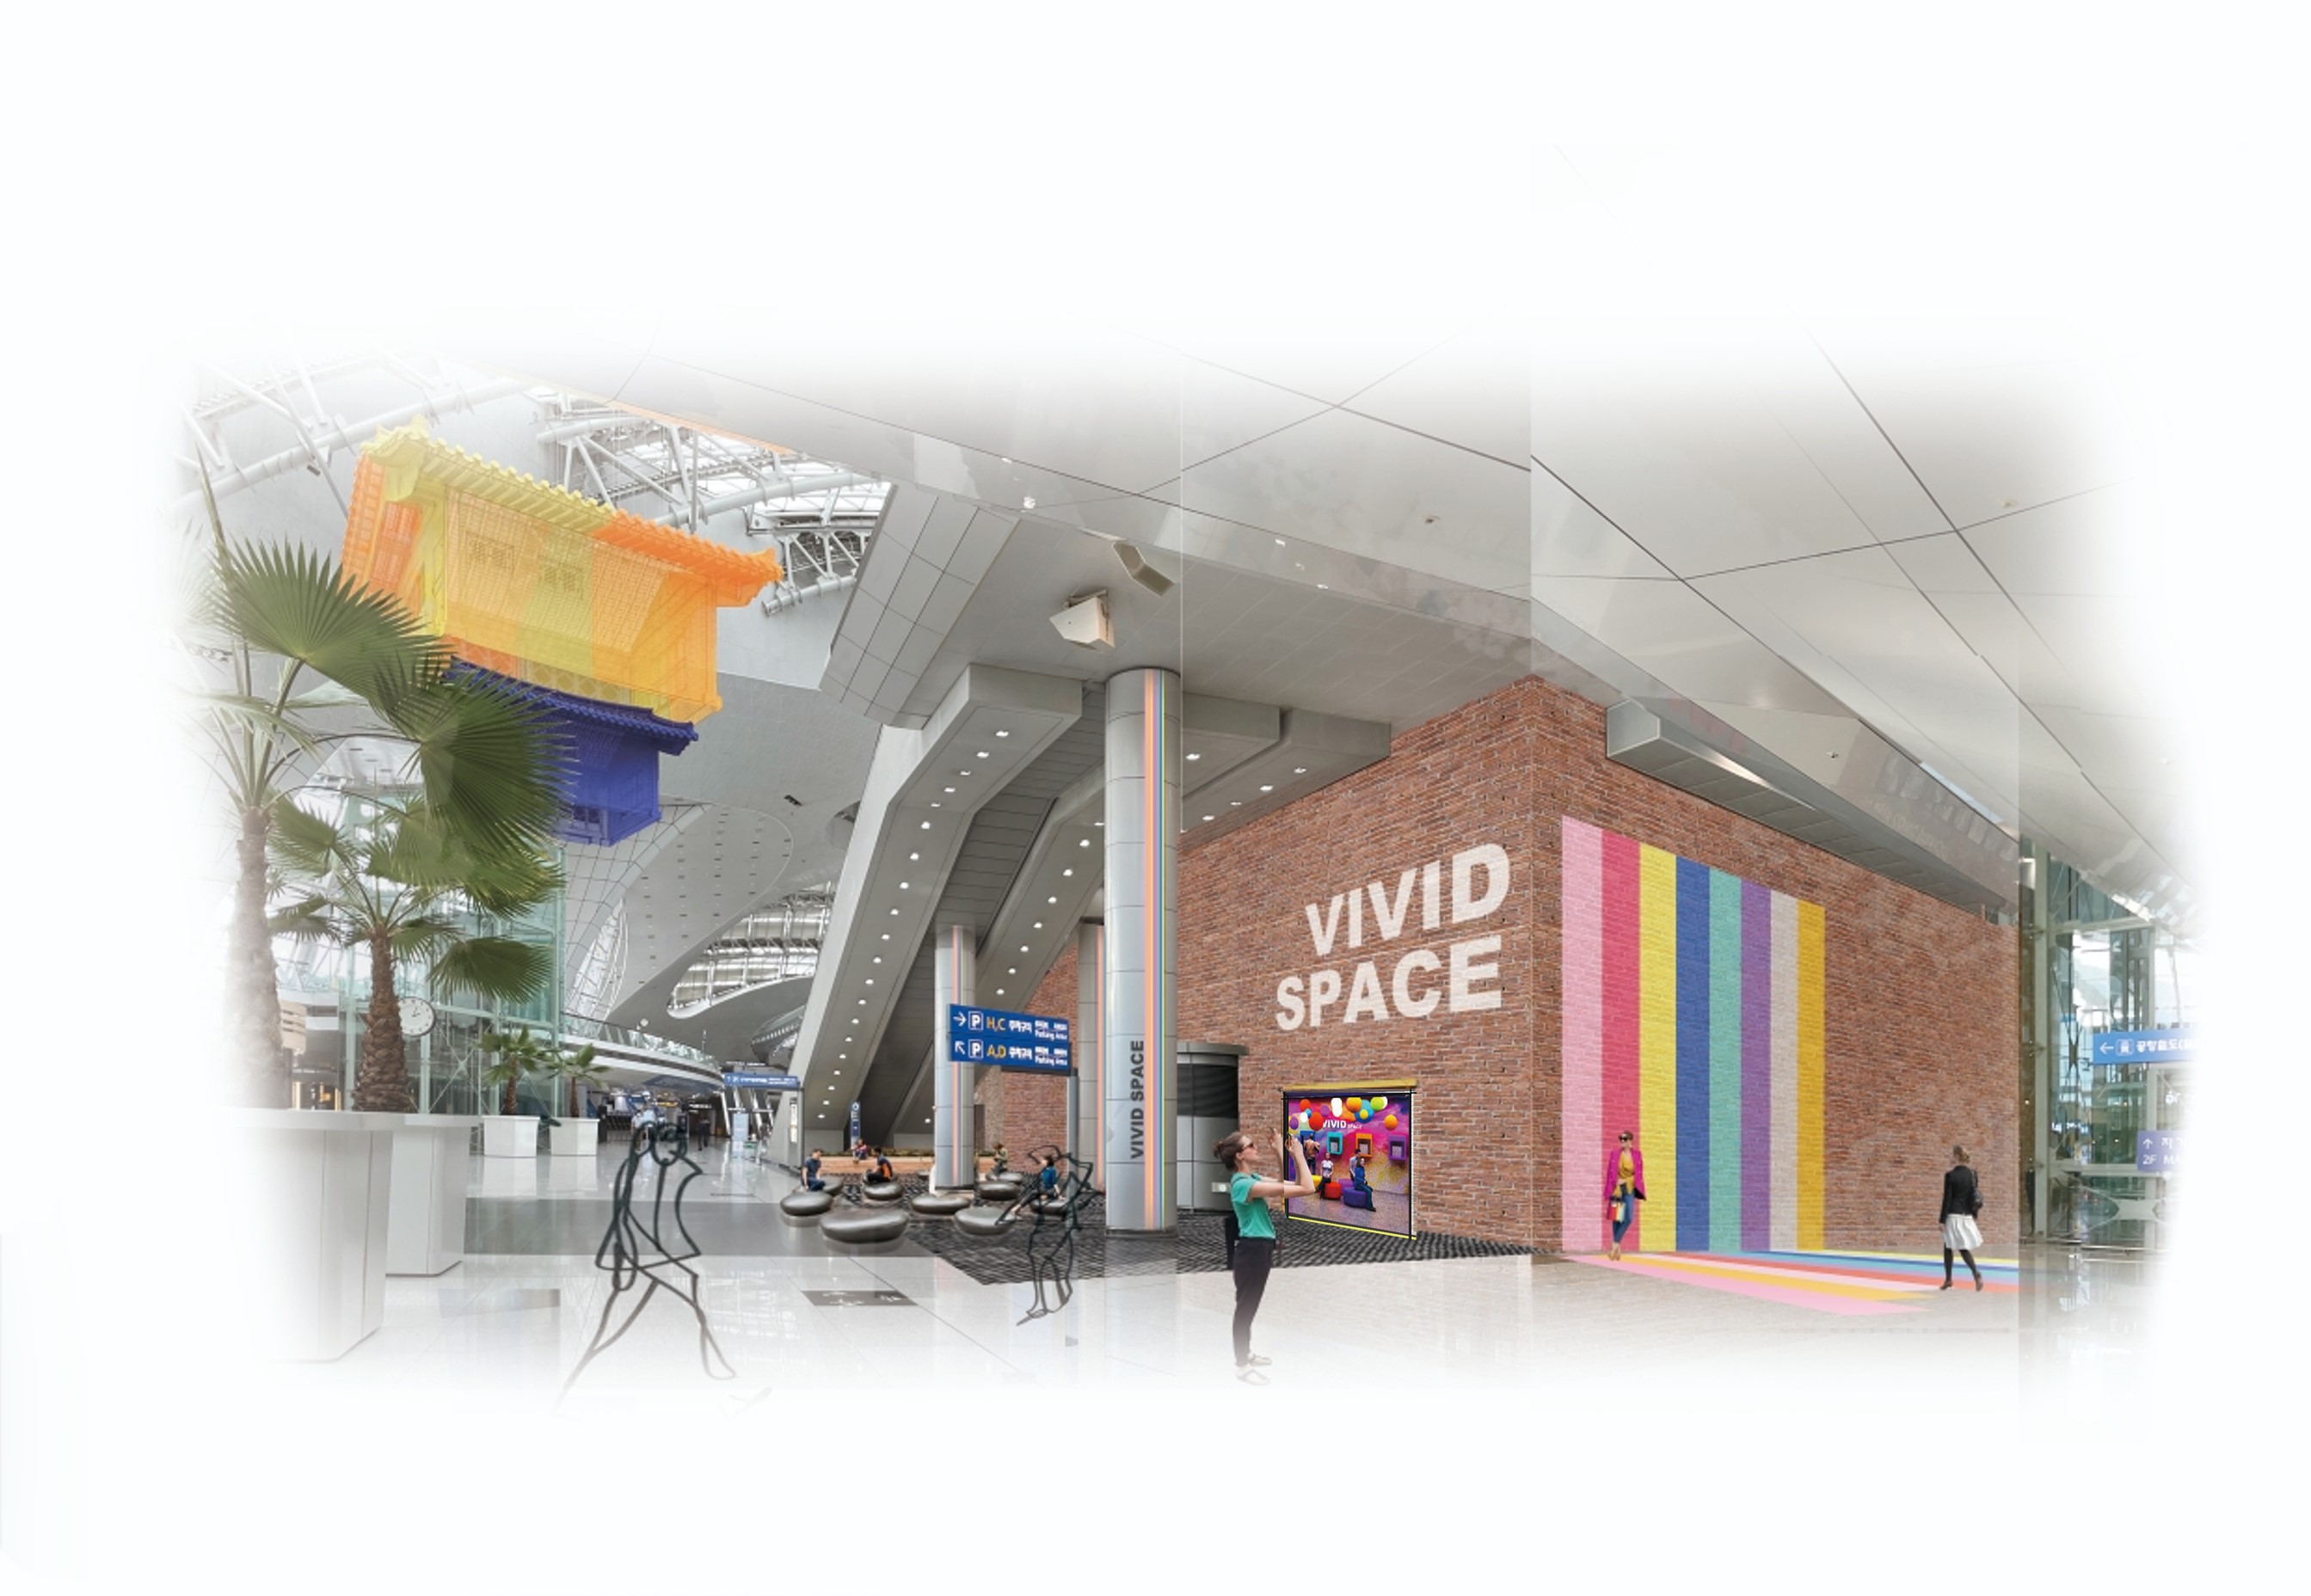 Incheon International Airport has opened Vivid Space, an exhibition hall featuring content presented through technological convergence.